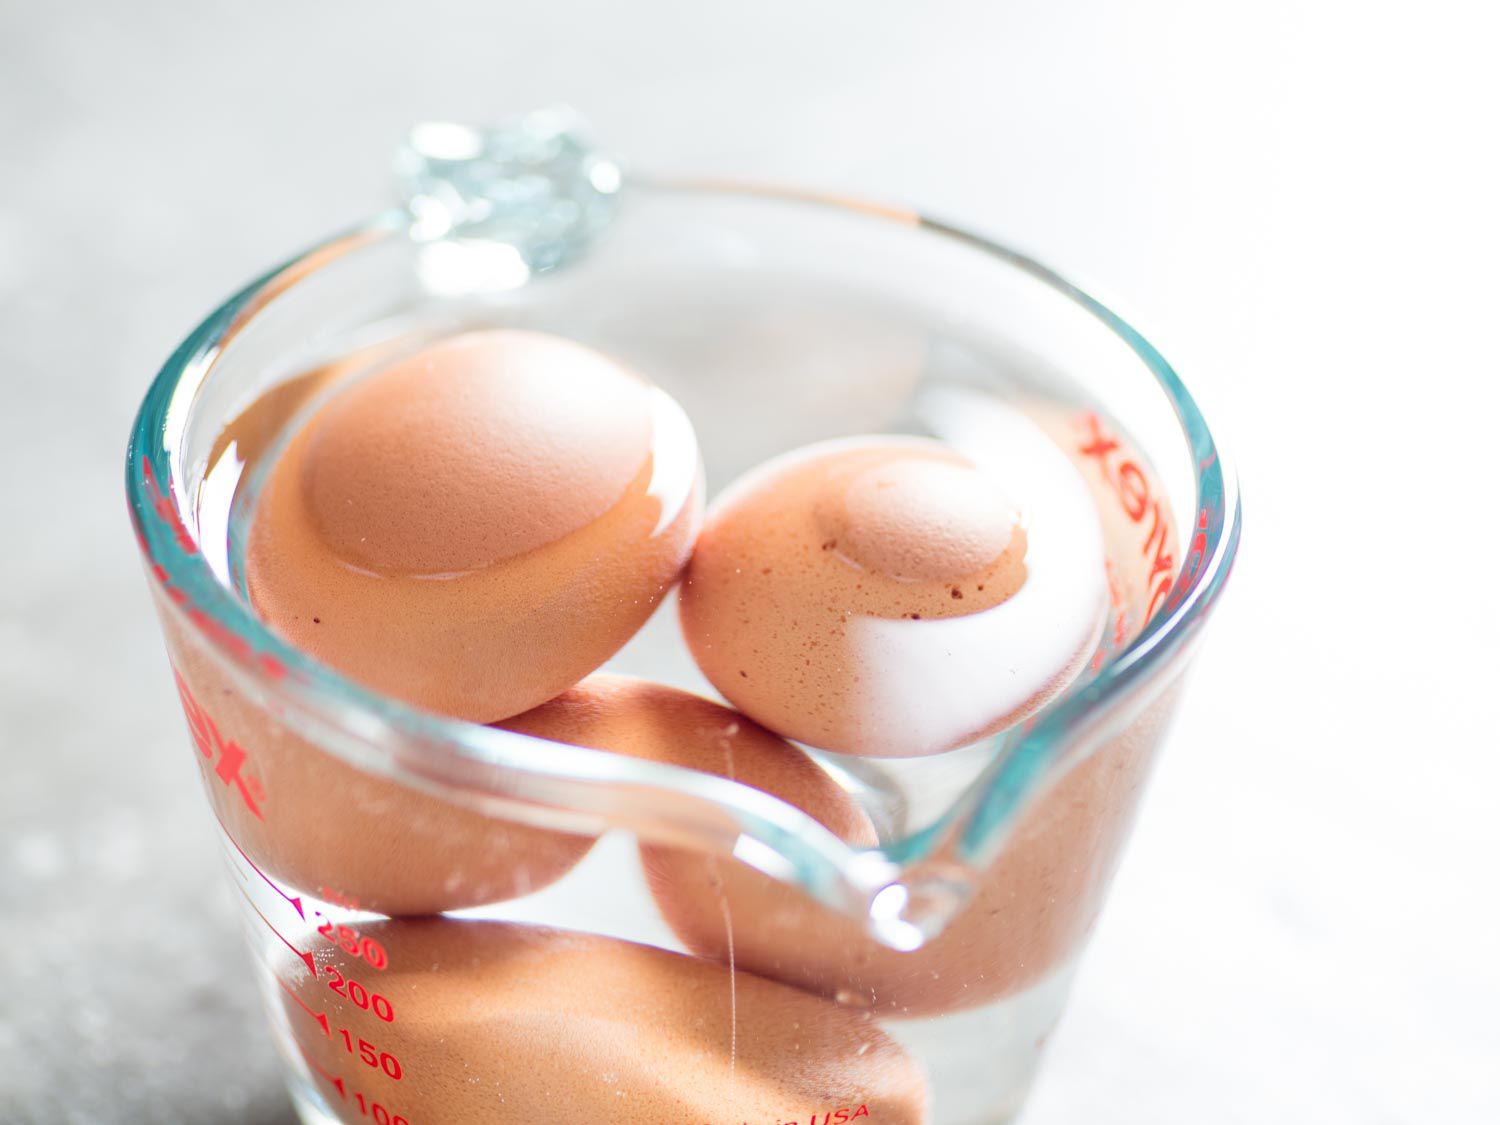 Brown eggs submerged in a measuring cup full of warm water.